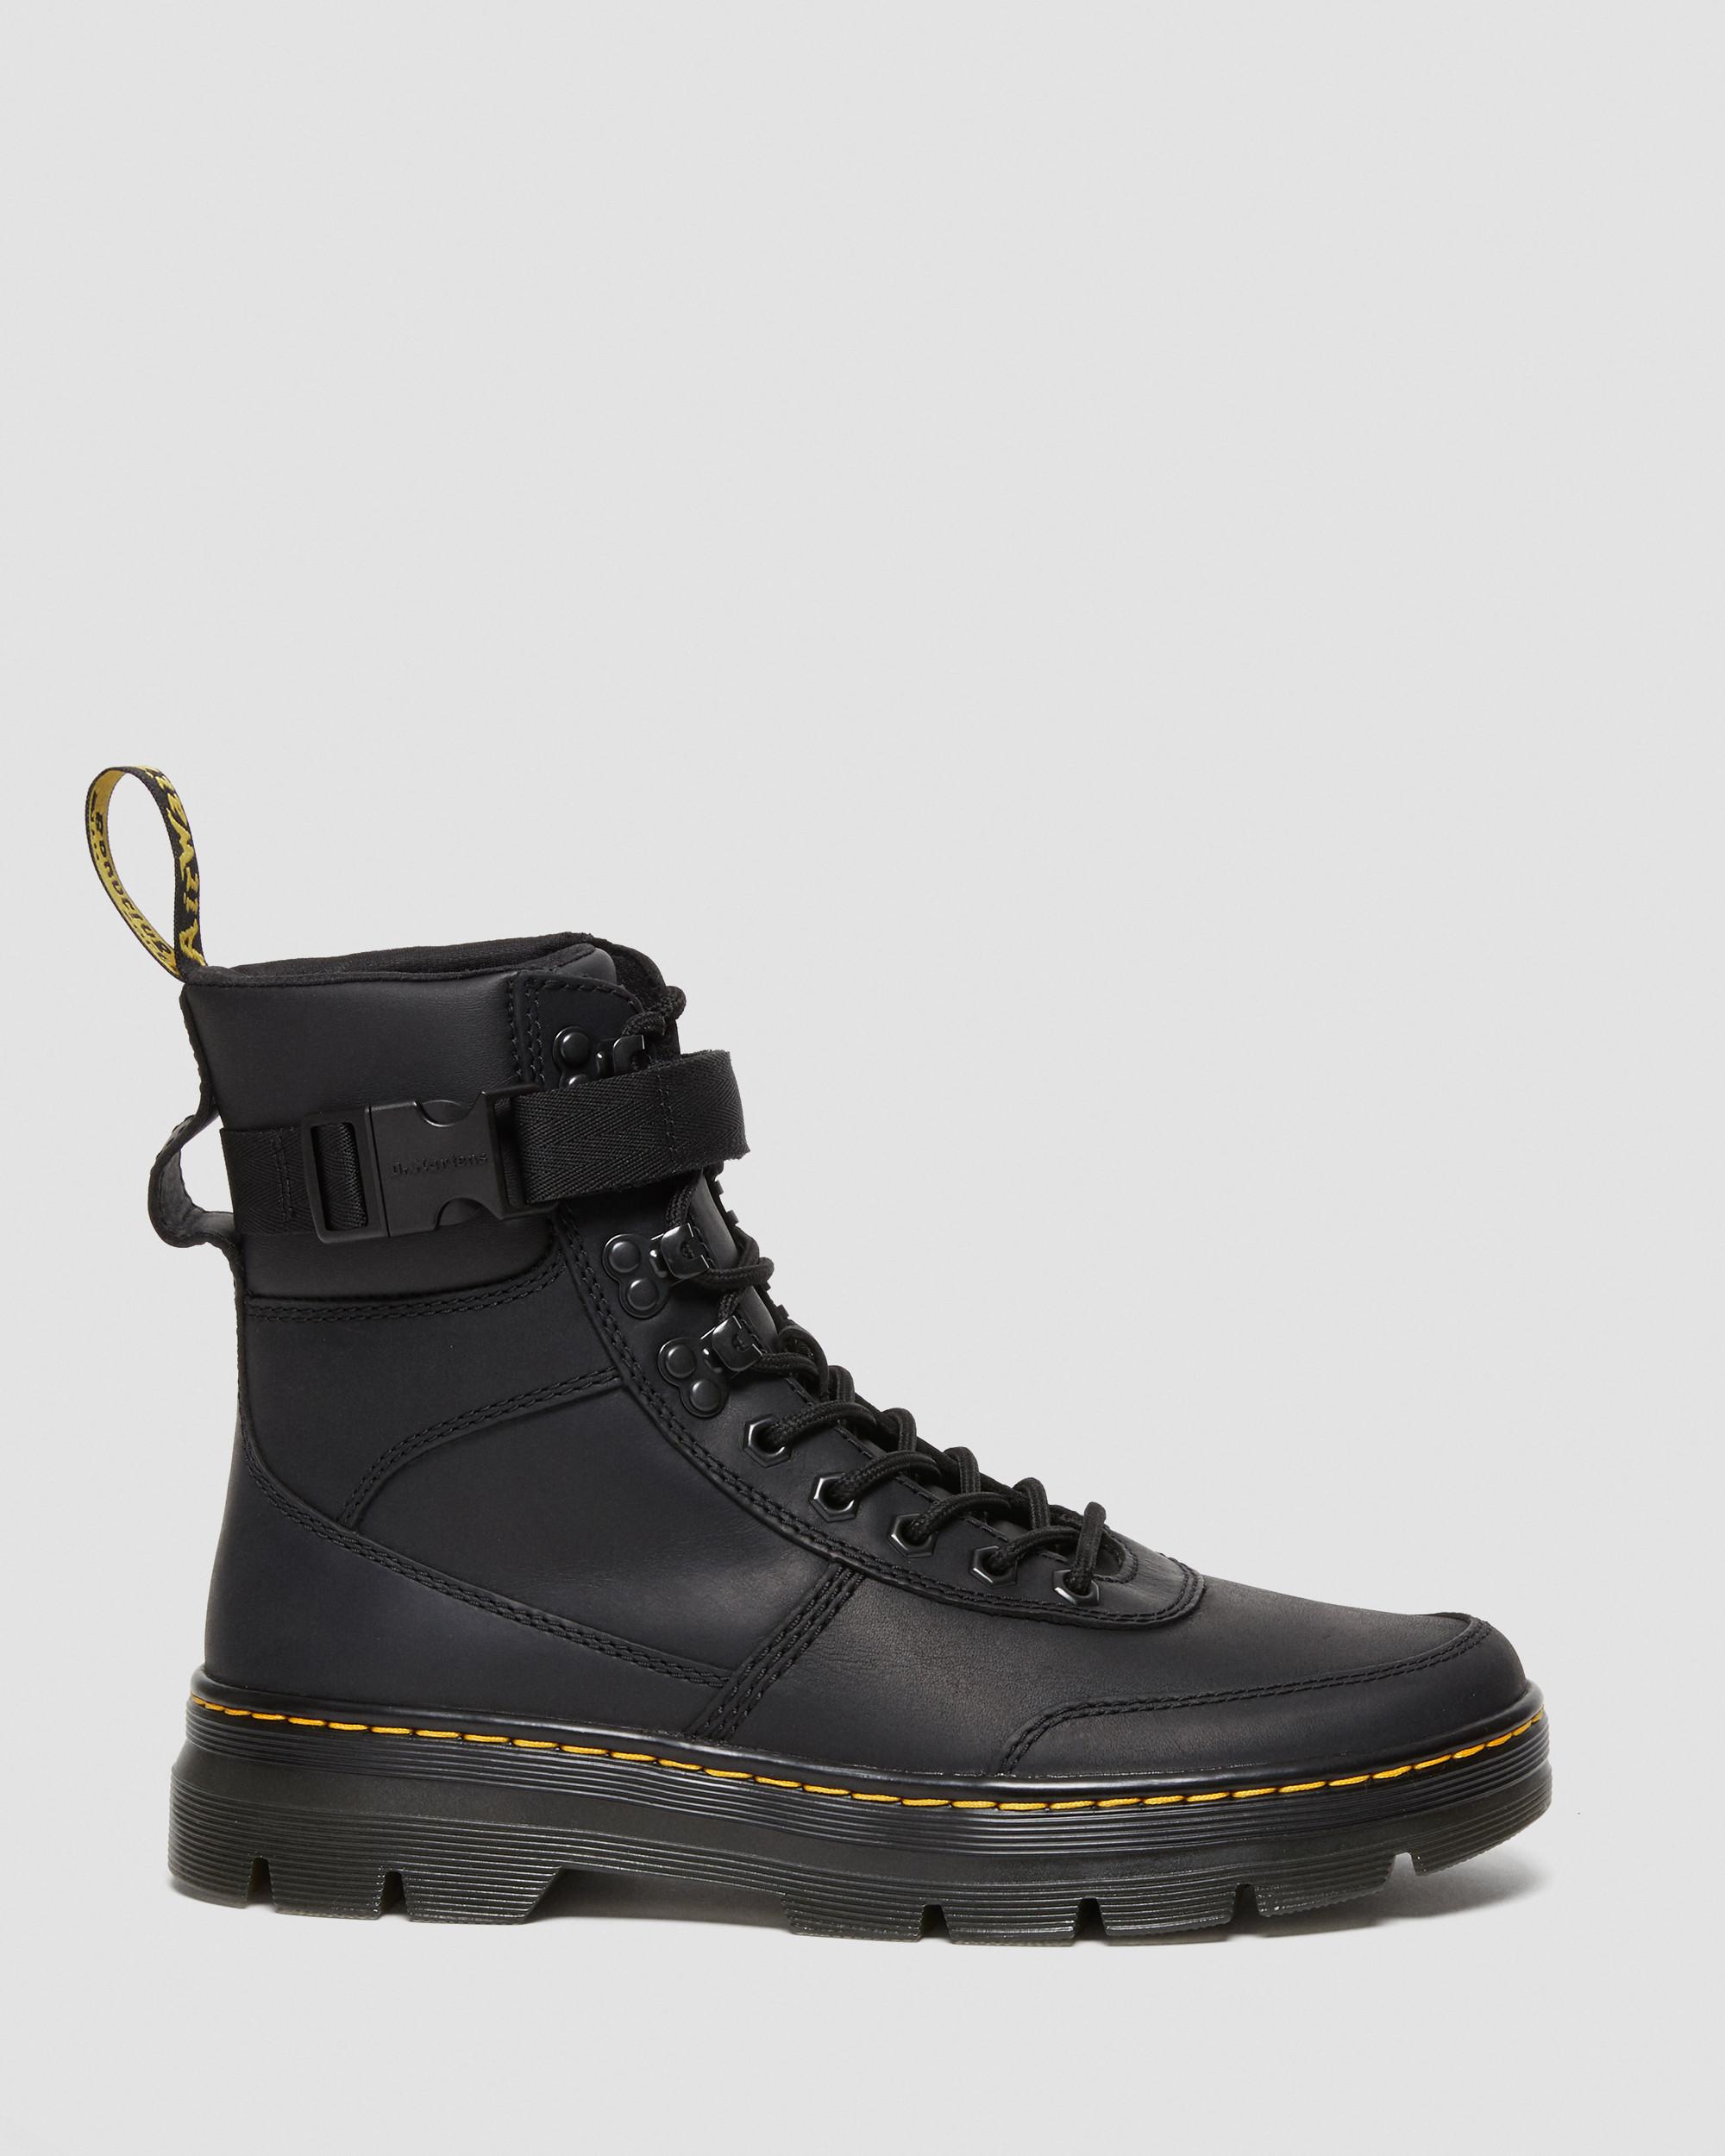 Combs Tech II Wyoming Leather Utility Boots in Black